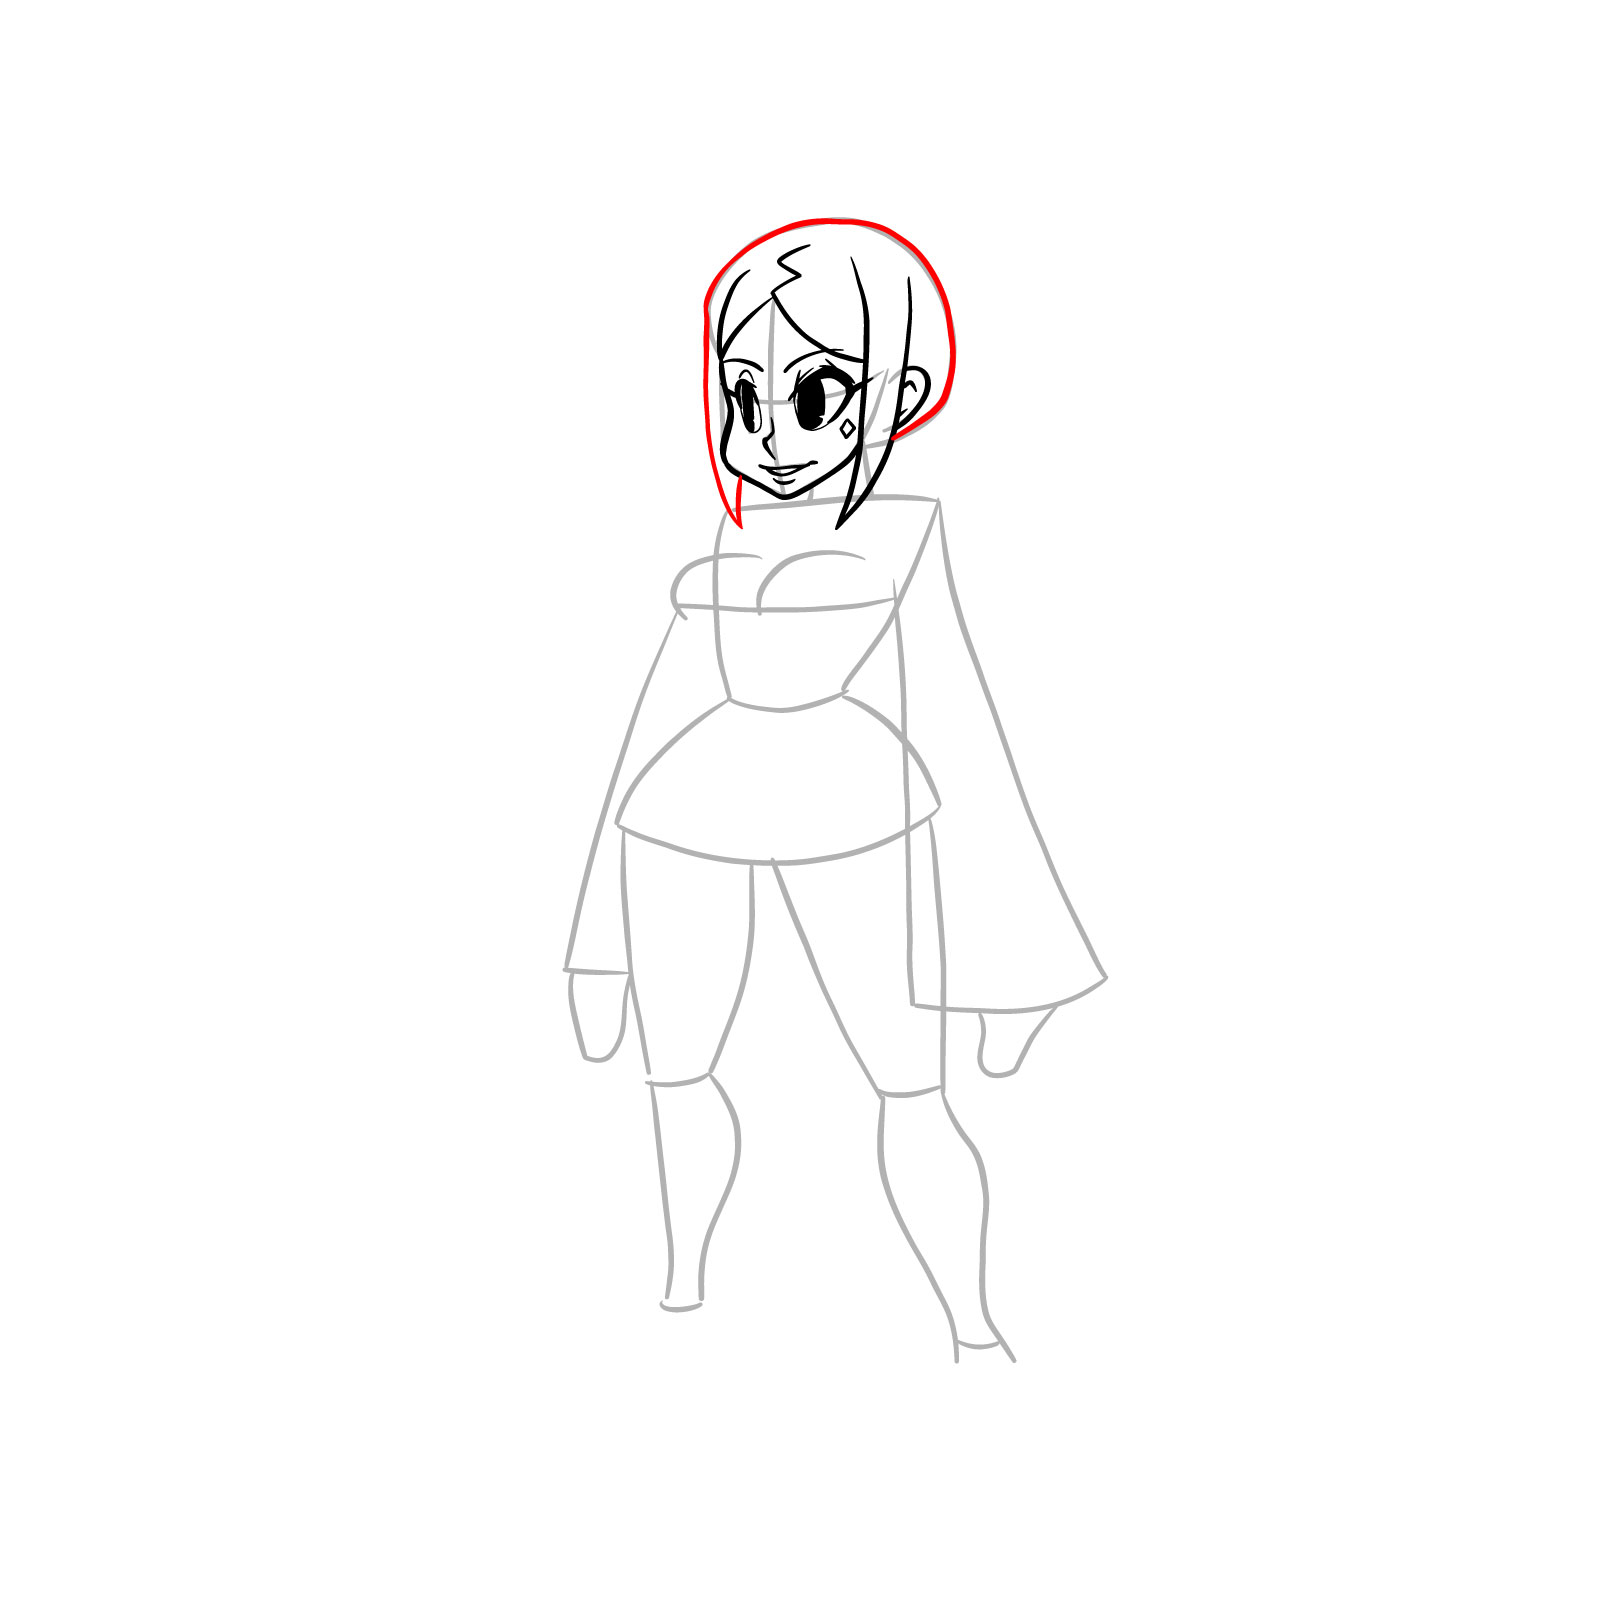 How to draw Cerebella from Skullgirls - step 12